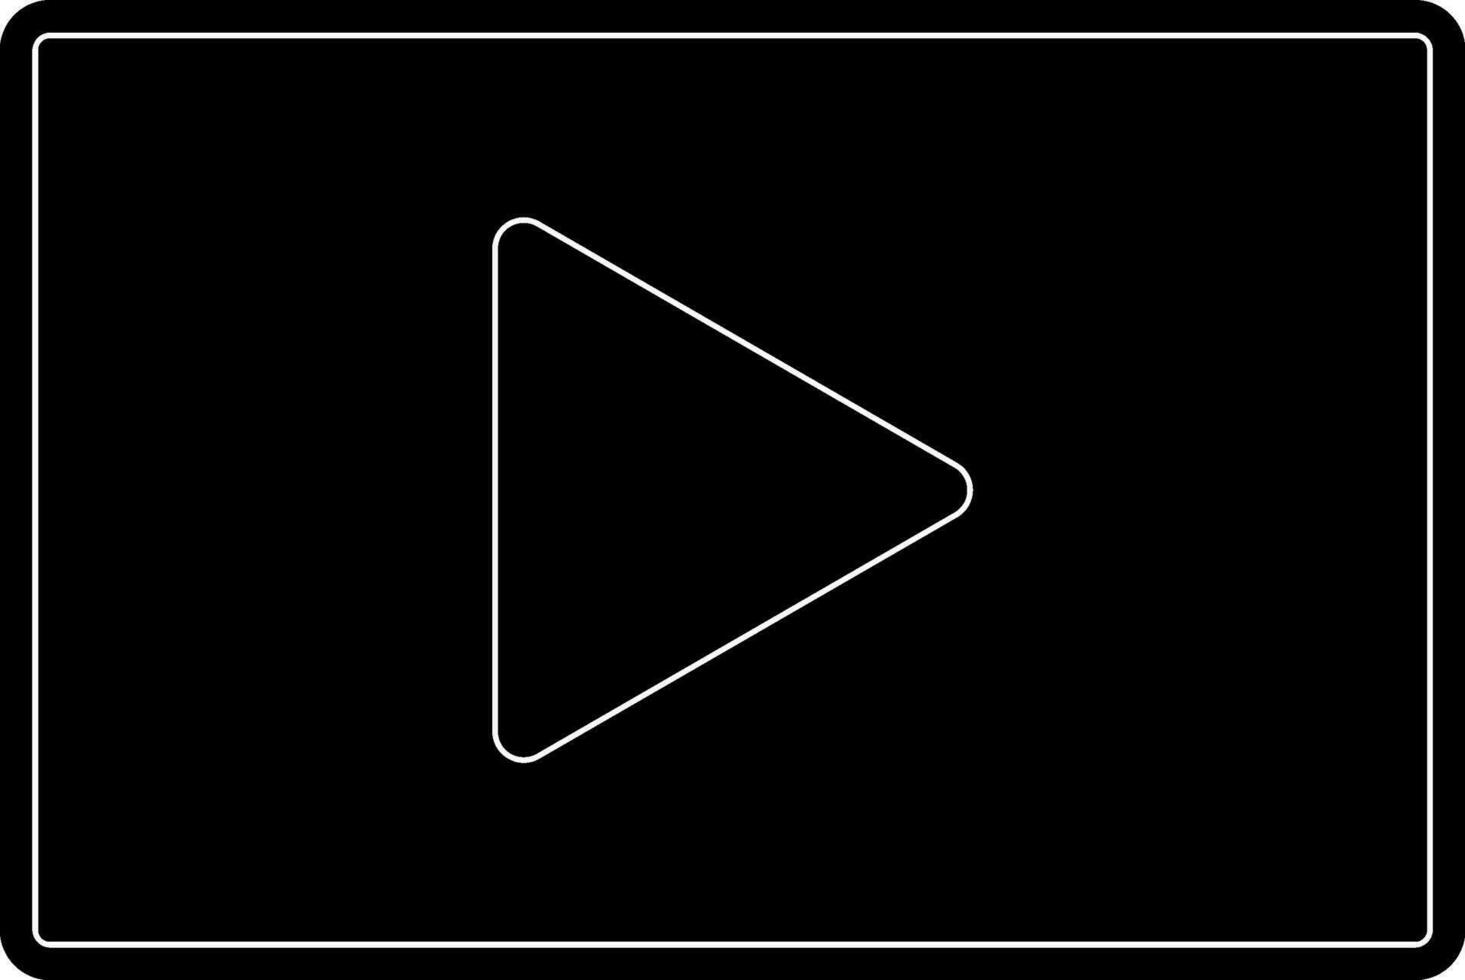 Video player in Black and white color. Glyph icon or symbol. vector